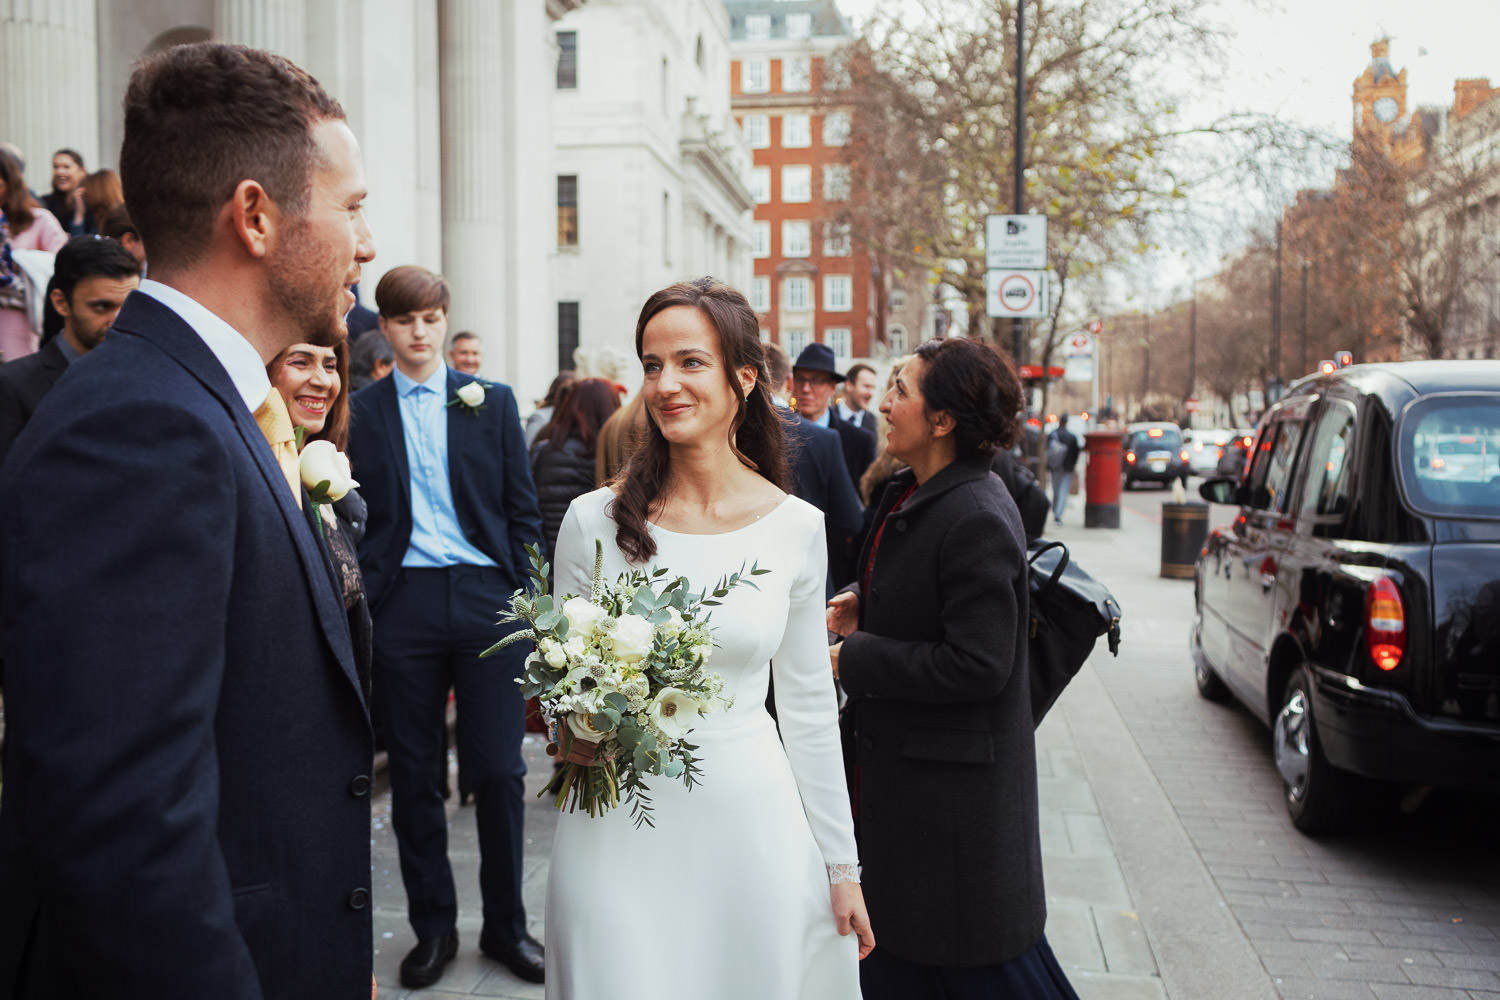 A reportage style portrait of a bride, unposed, at a wedding. She is holding white flowers, wearing a long white dress and is smiling, She is stood outside the Old Marylebone Town Hall after the ceremony. Her husband is in shot, she is surrounded by wedding guests as black cabs turn up.